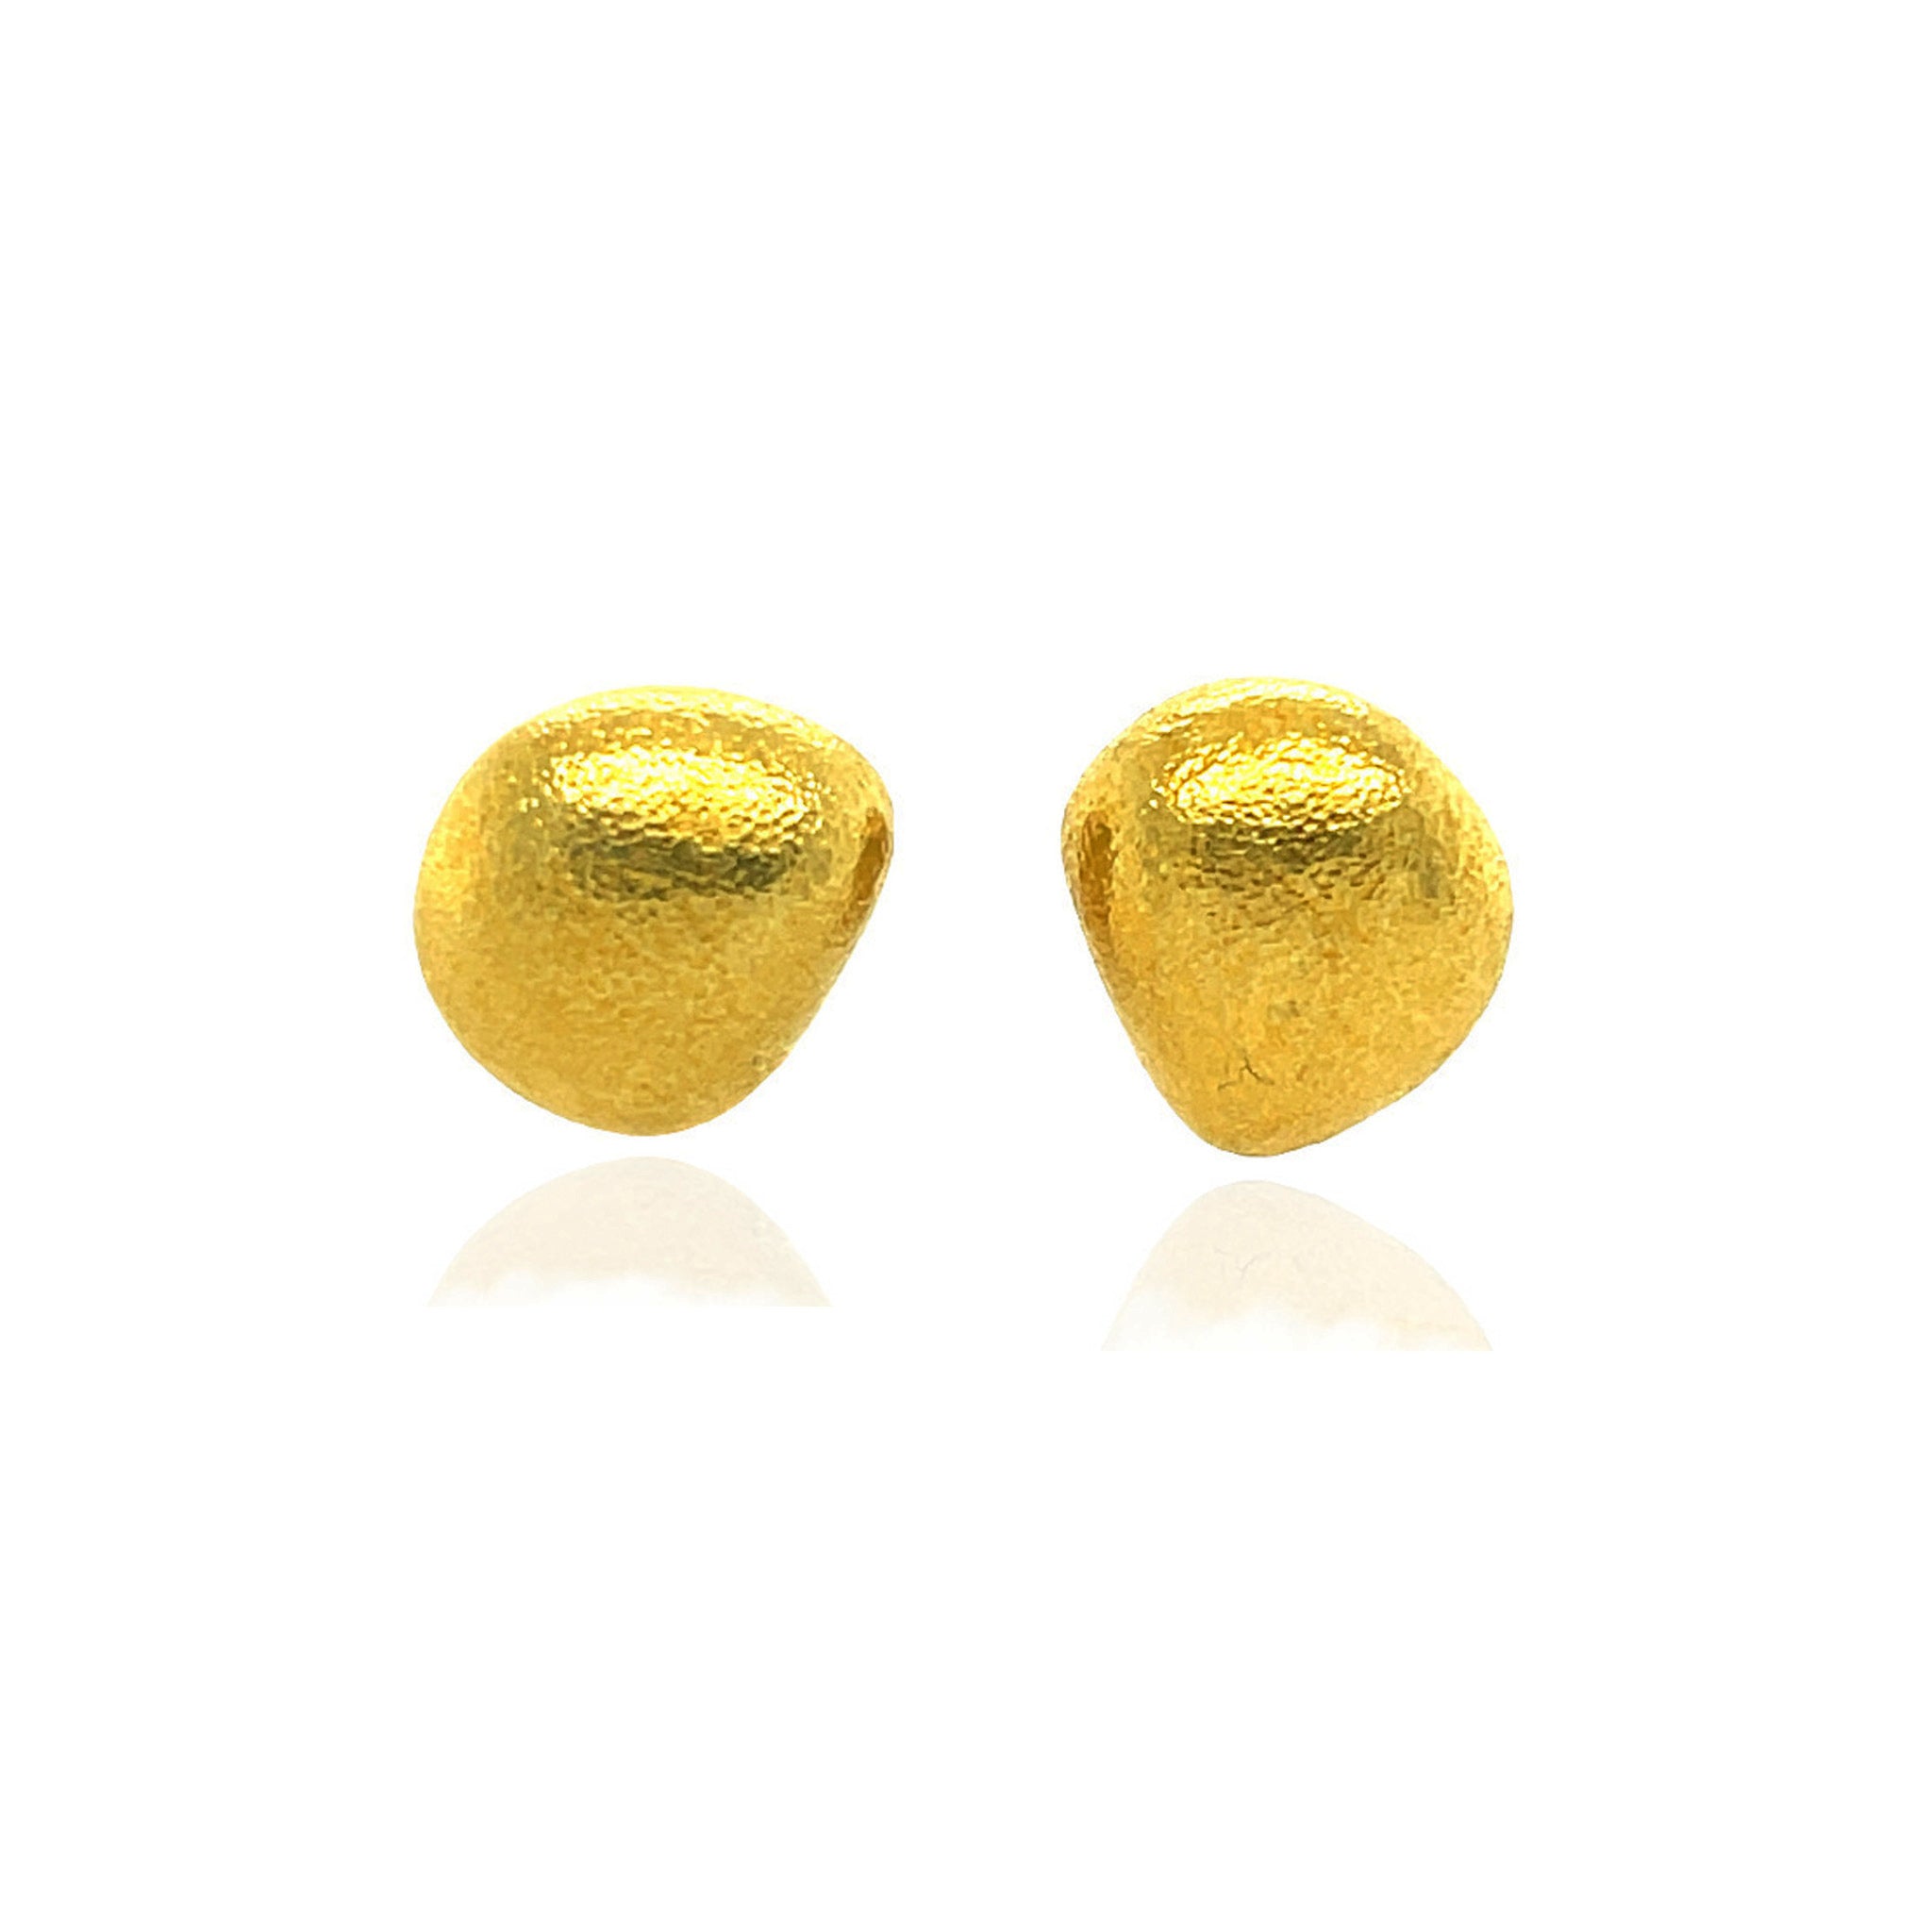 Tiffany & Co. Textured 18k Gold Earclips